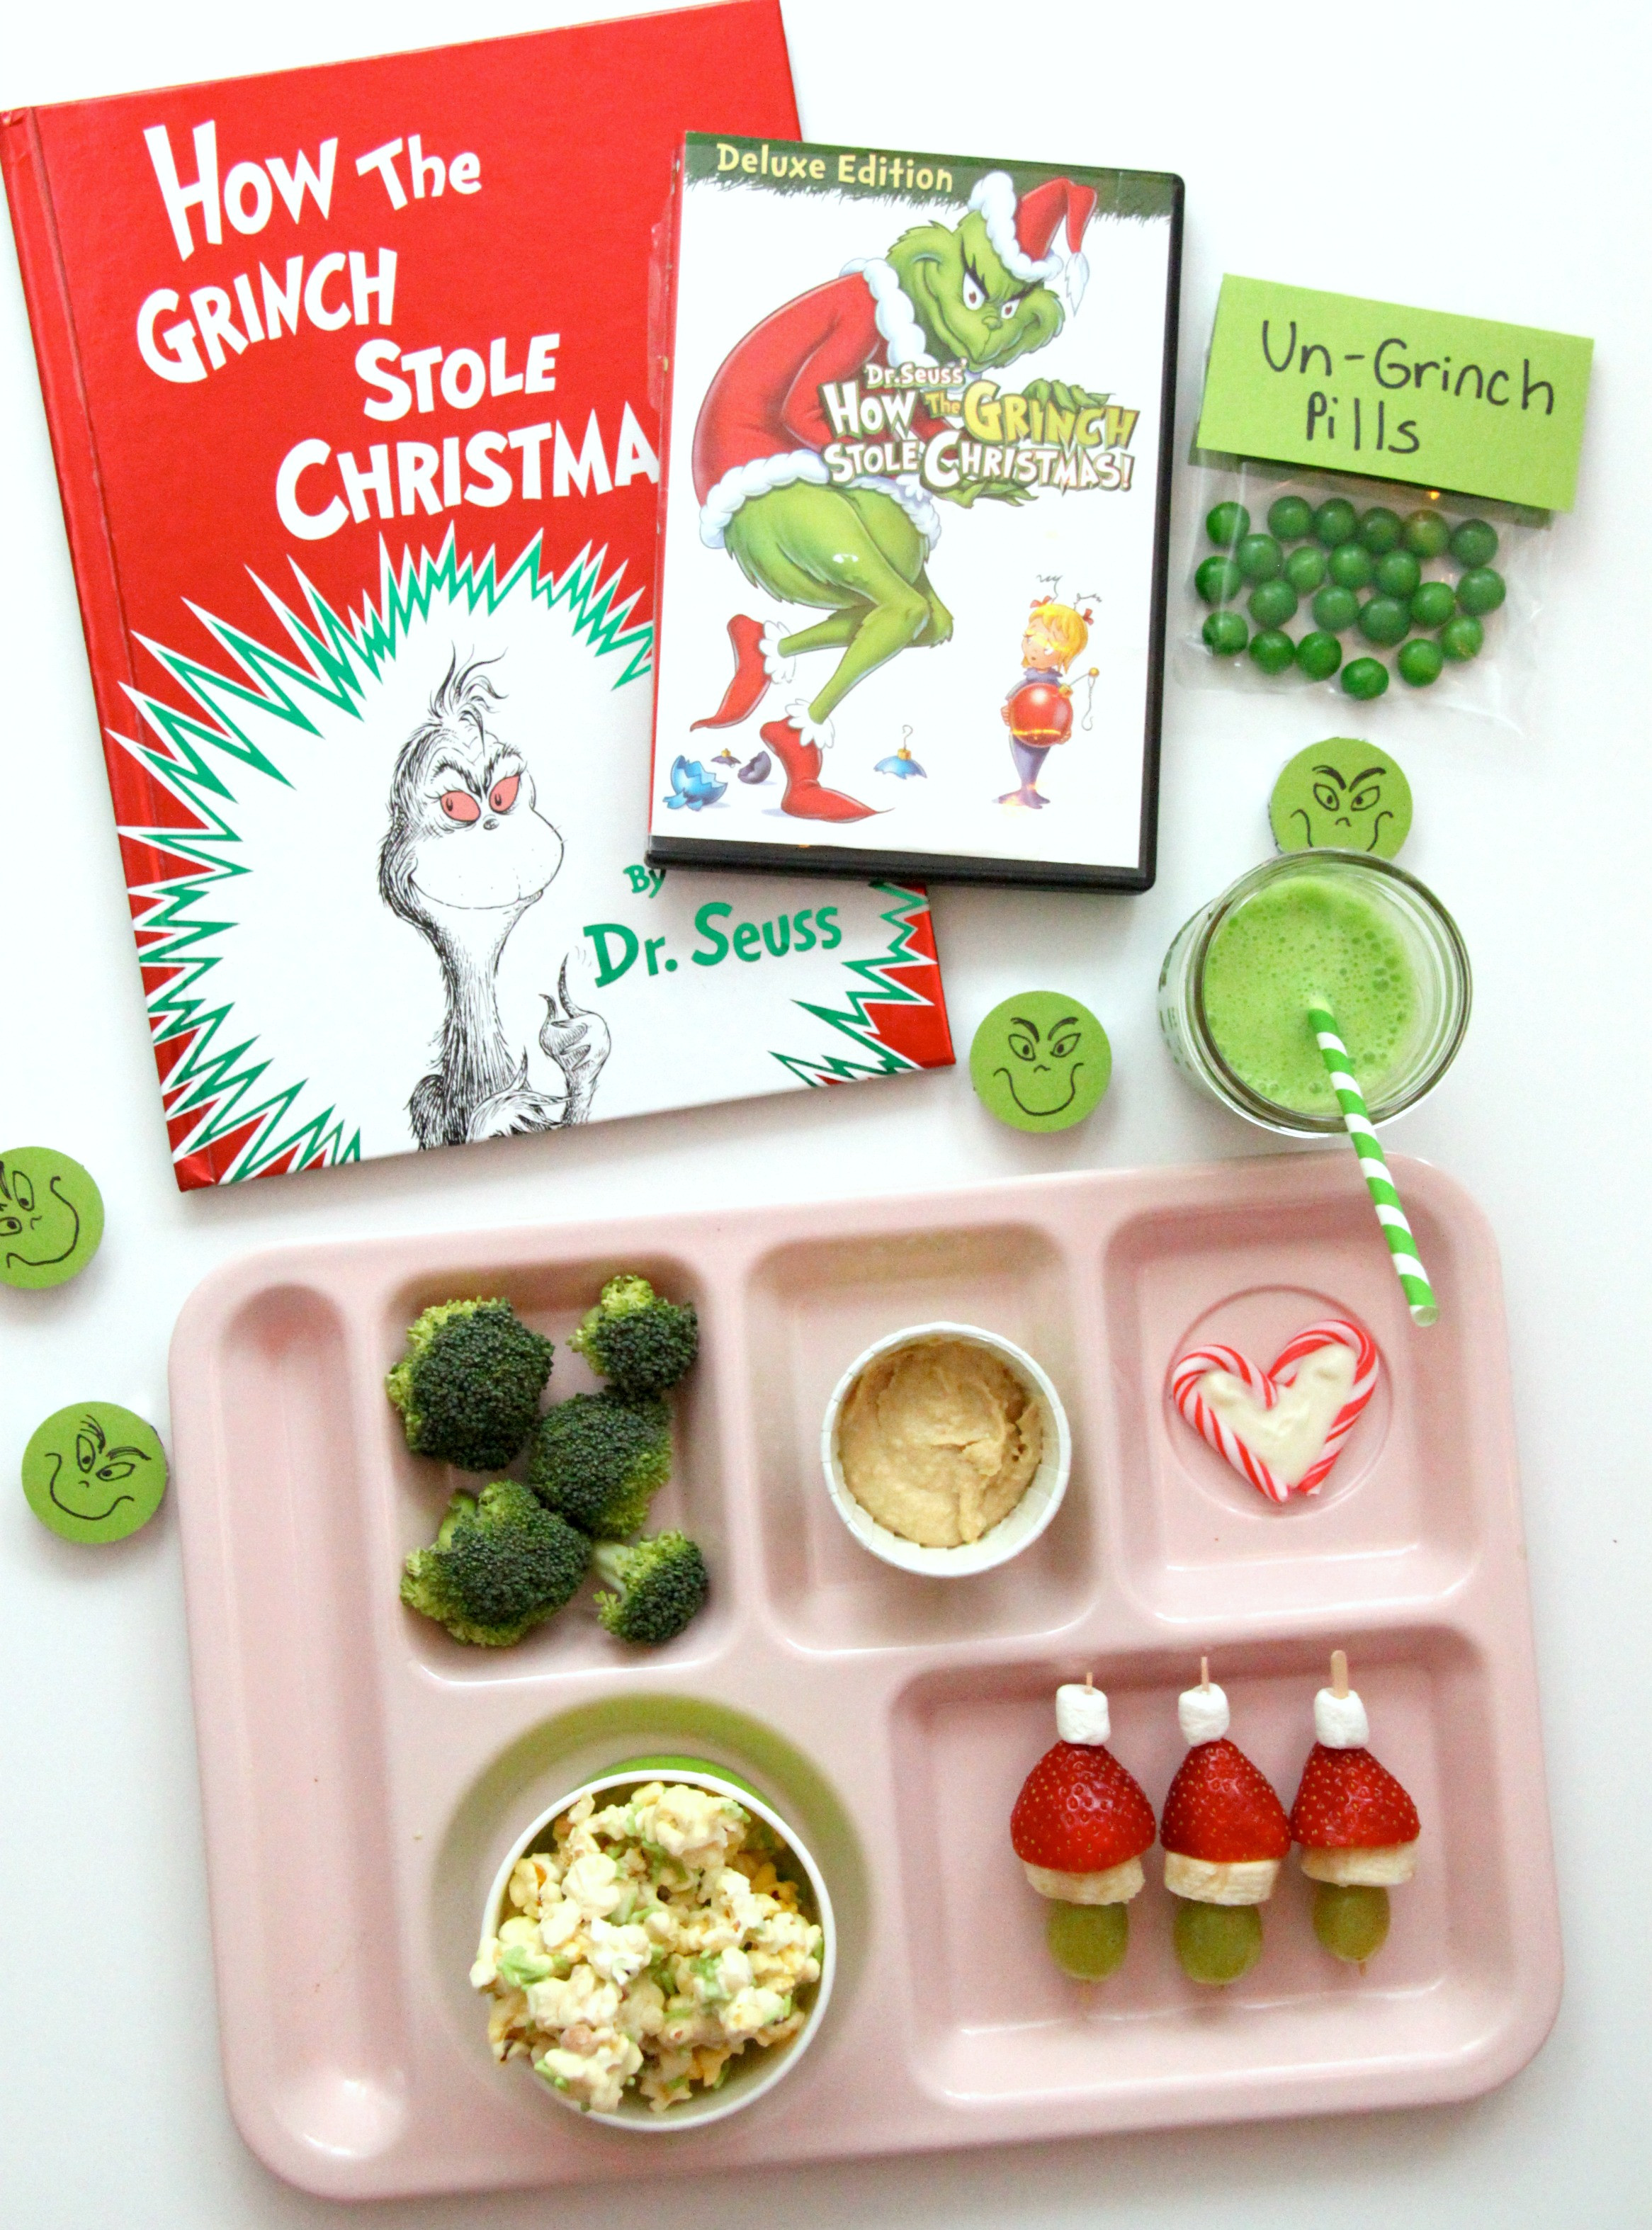 How The Grinch Stole Christmas Party Ideas
 How the Grinch Stole Christmas Party Smashed Peas & Carrots